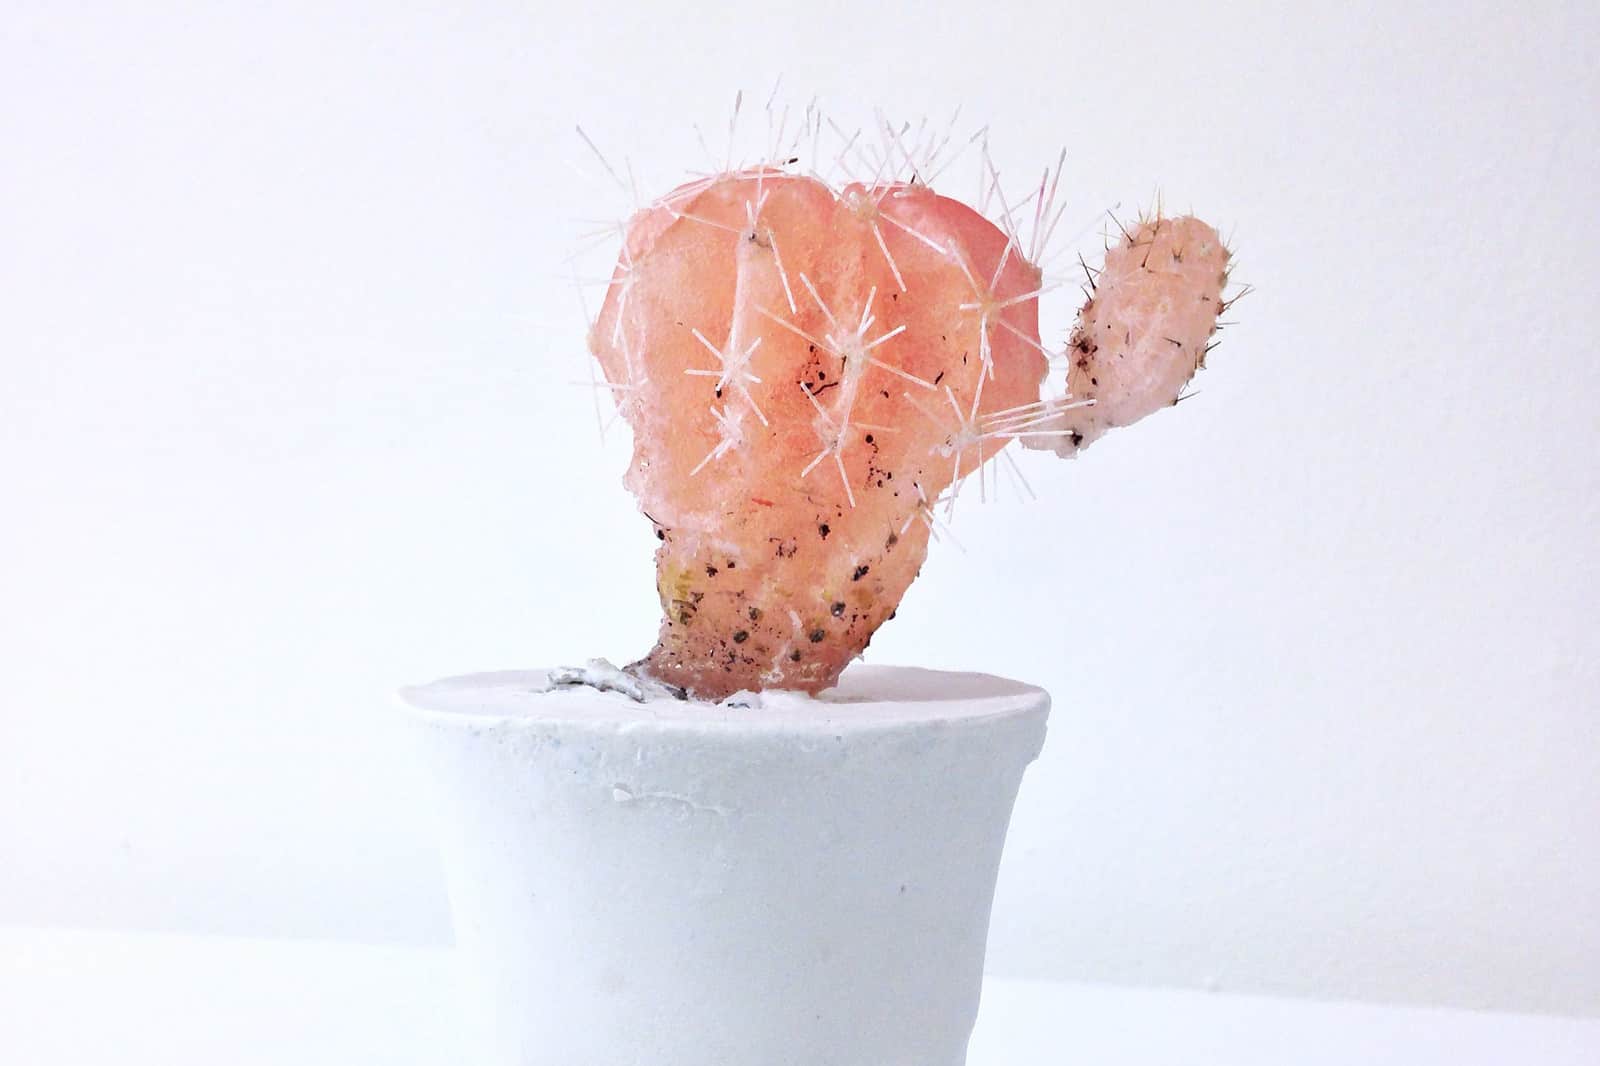 Day-Glo Wax Sculptures Made From Cacti